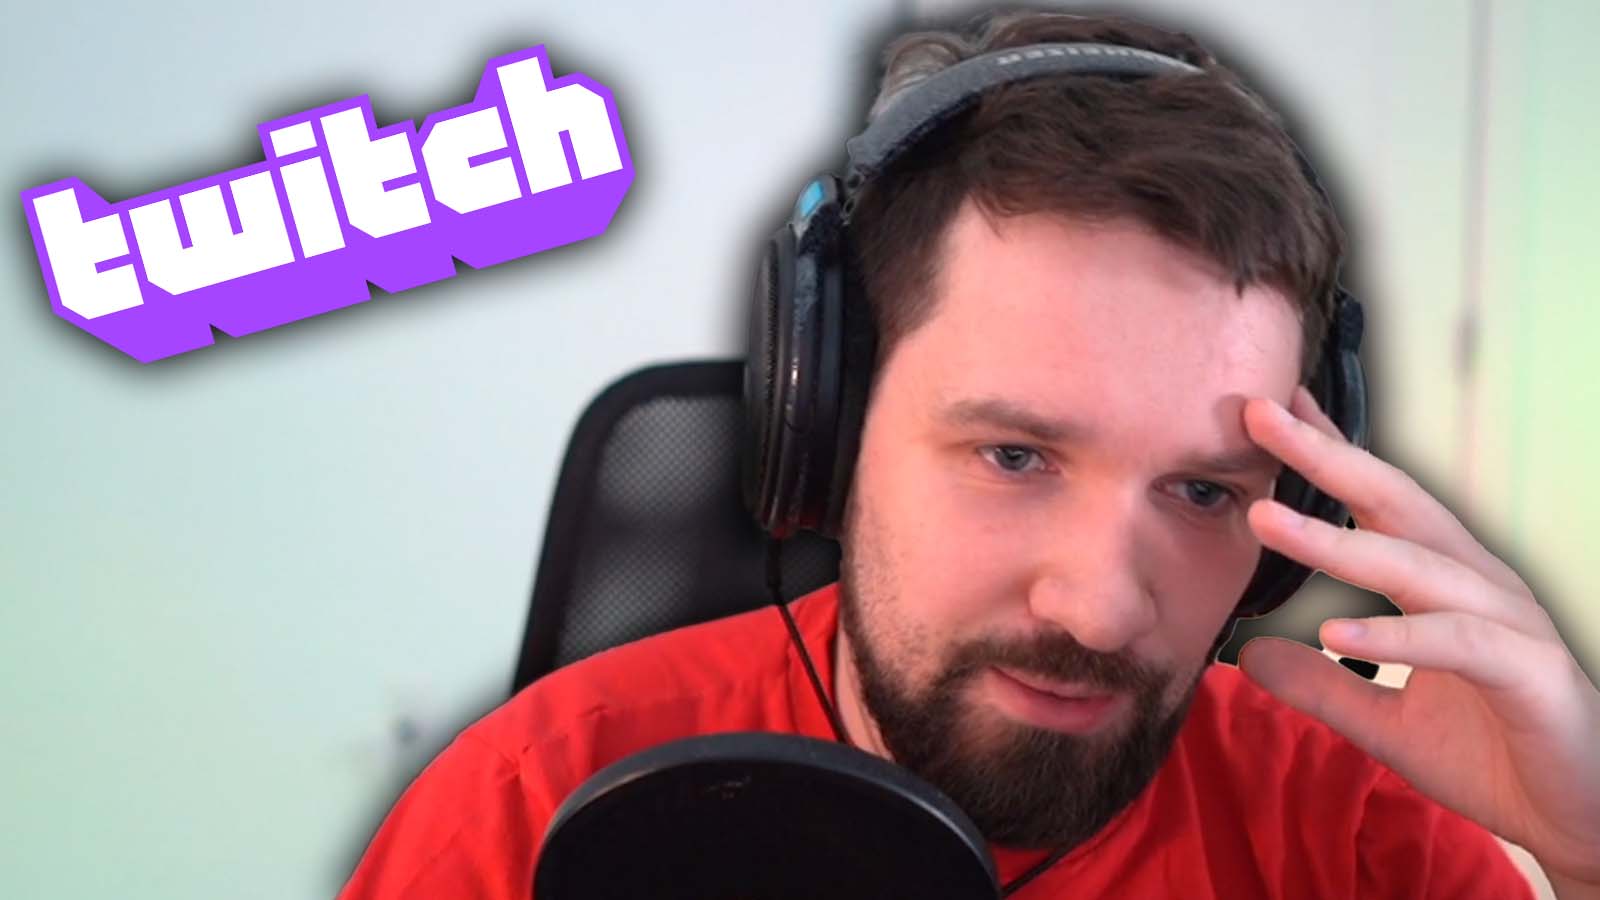 destiny streamer talks about nightmares of being bullied